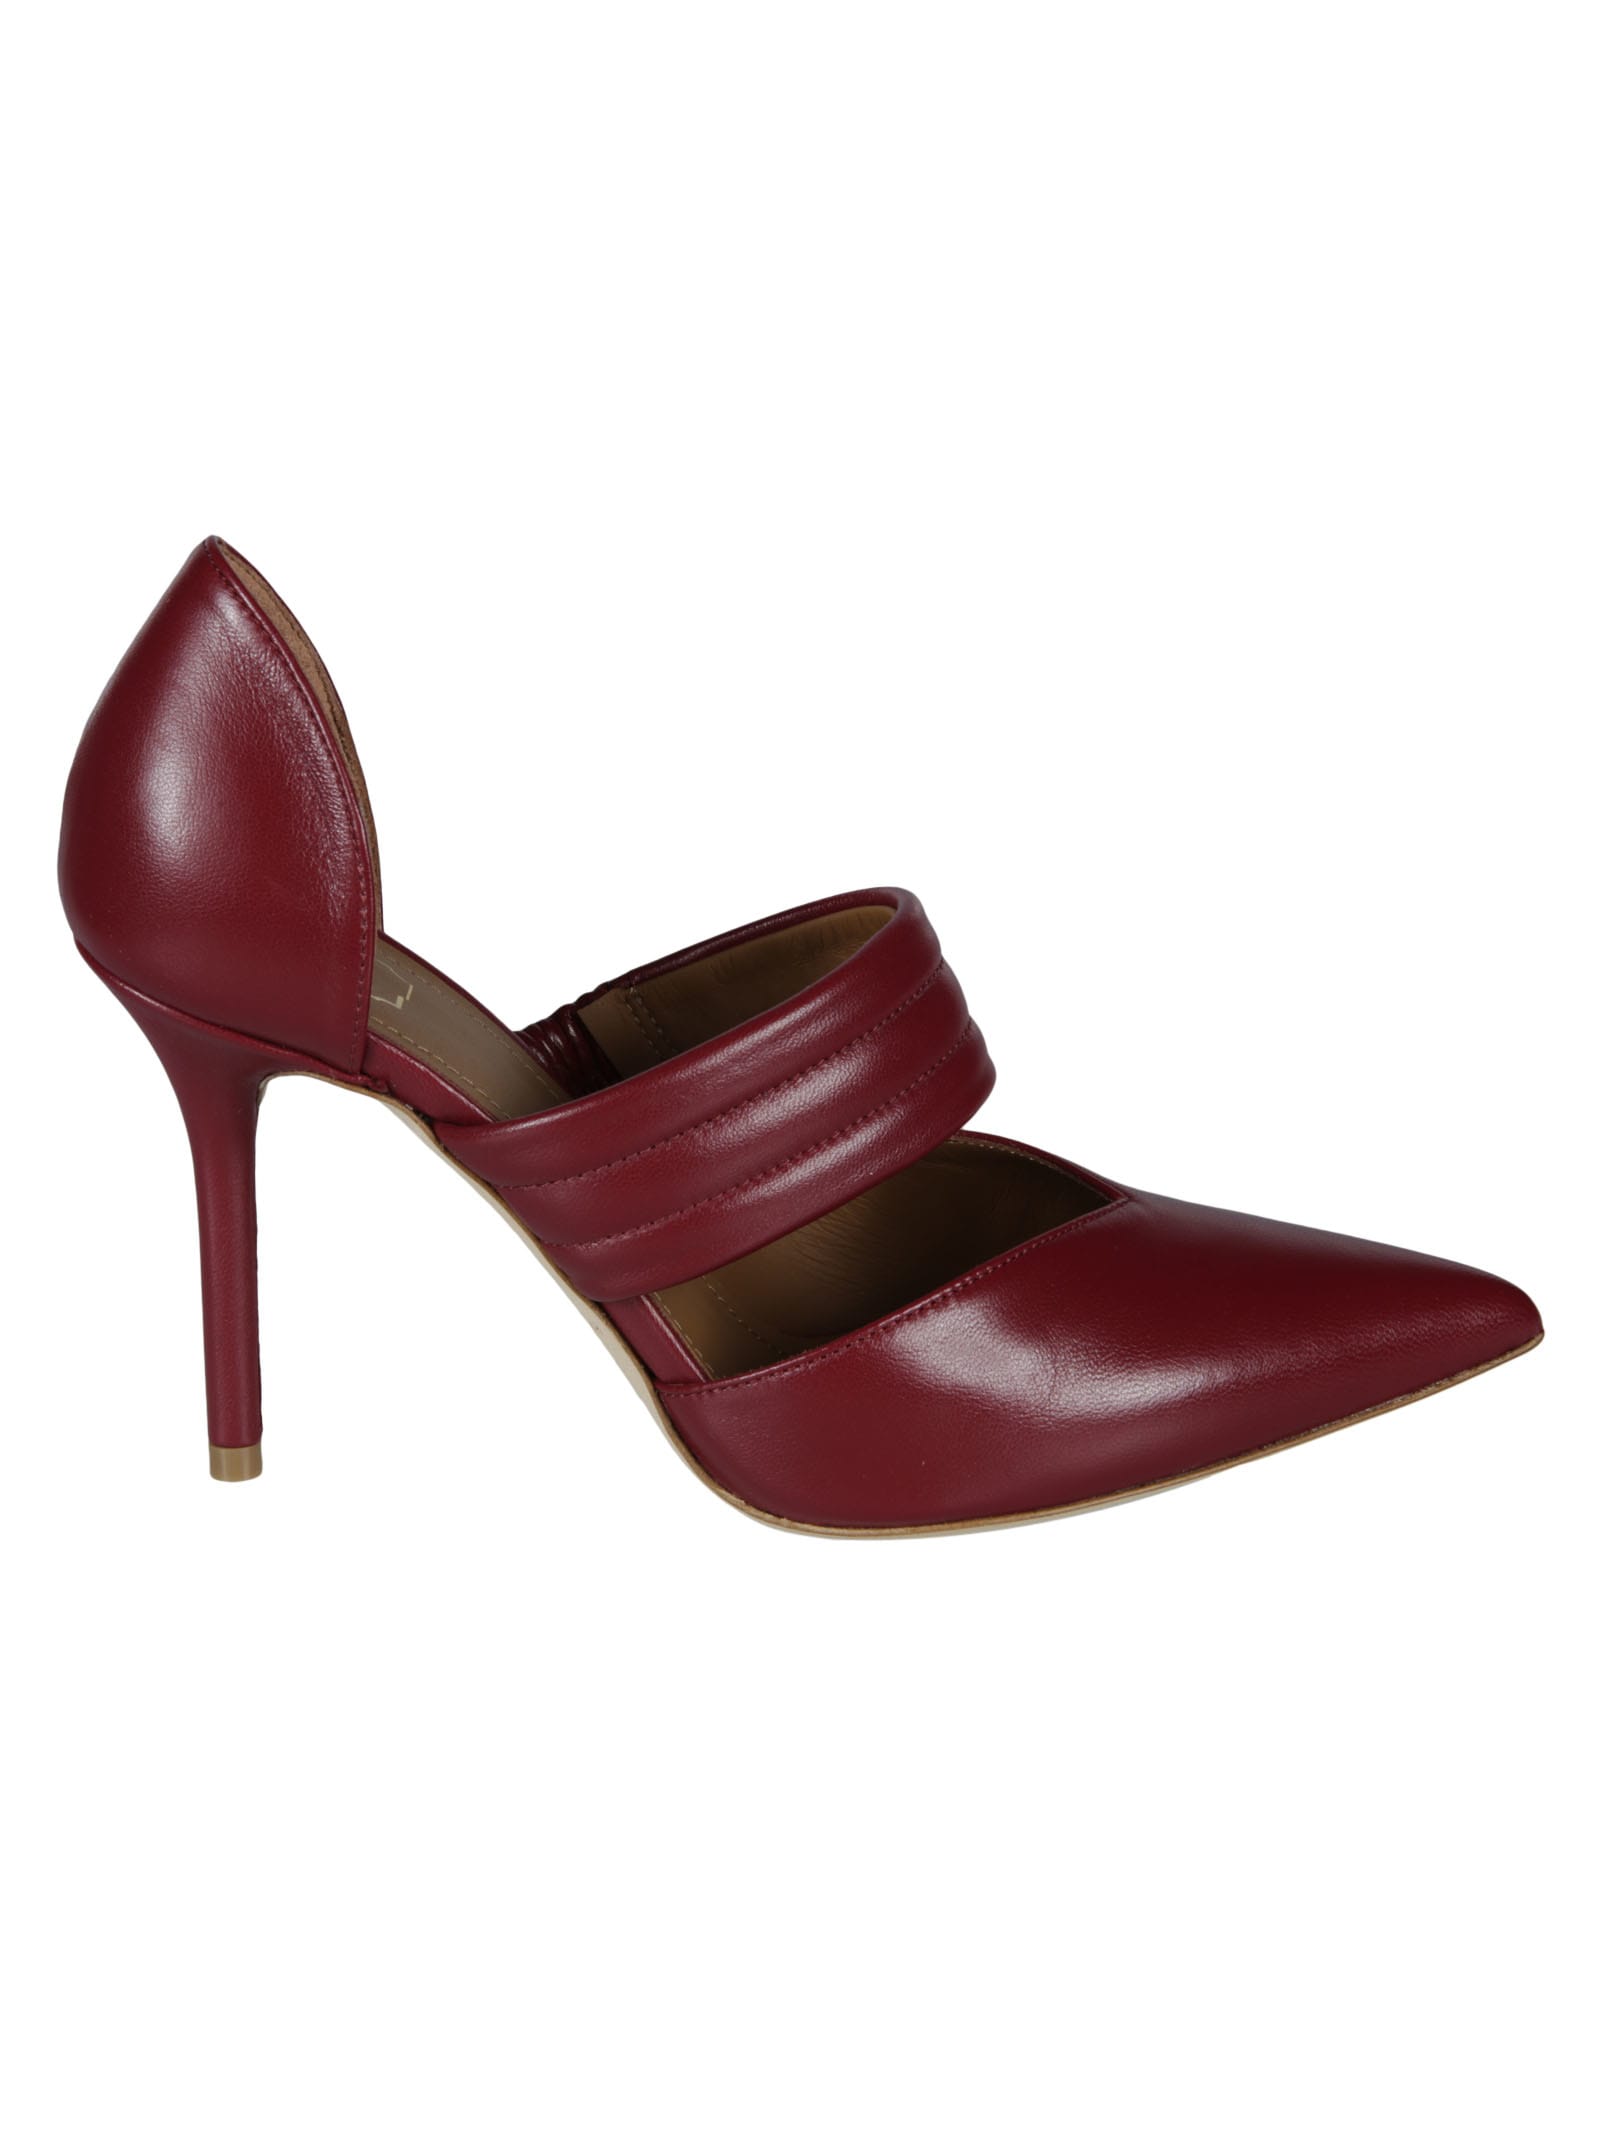 Malone Souliers Ankle Strap Pumps